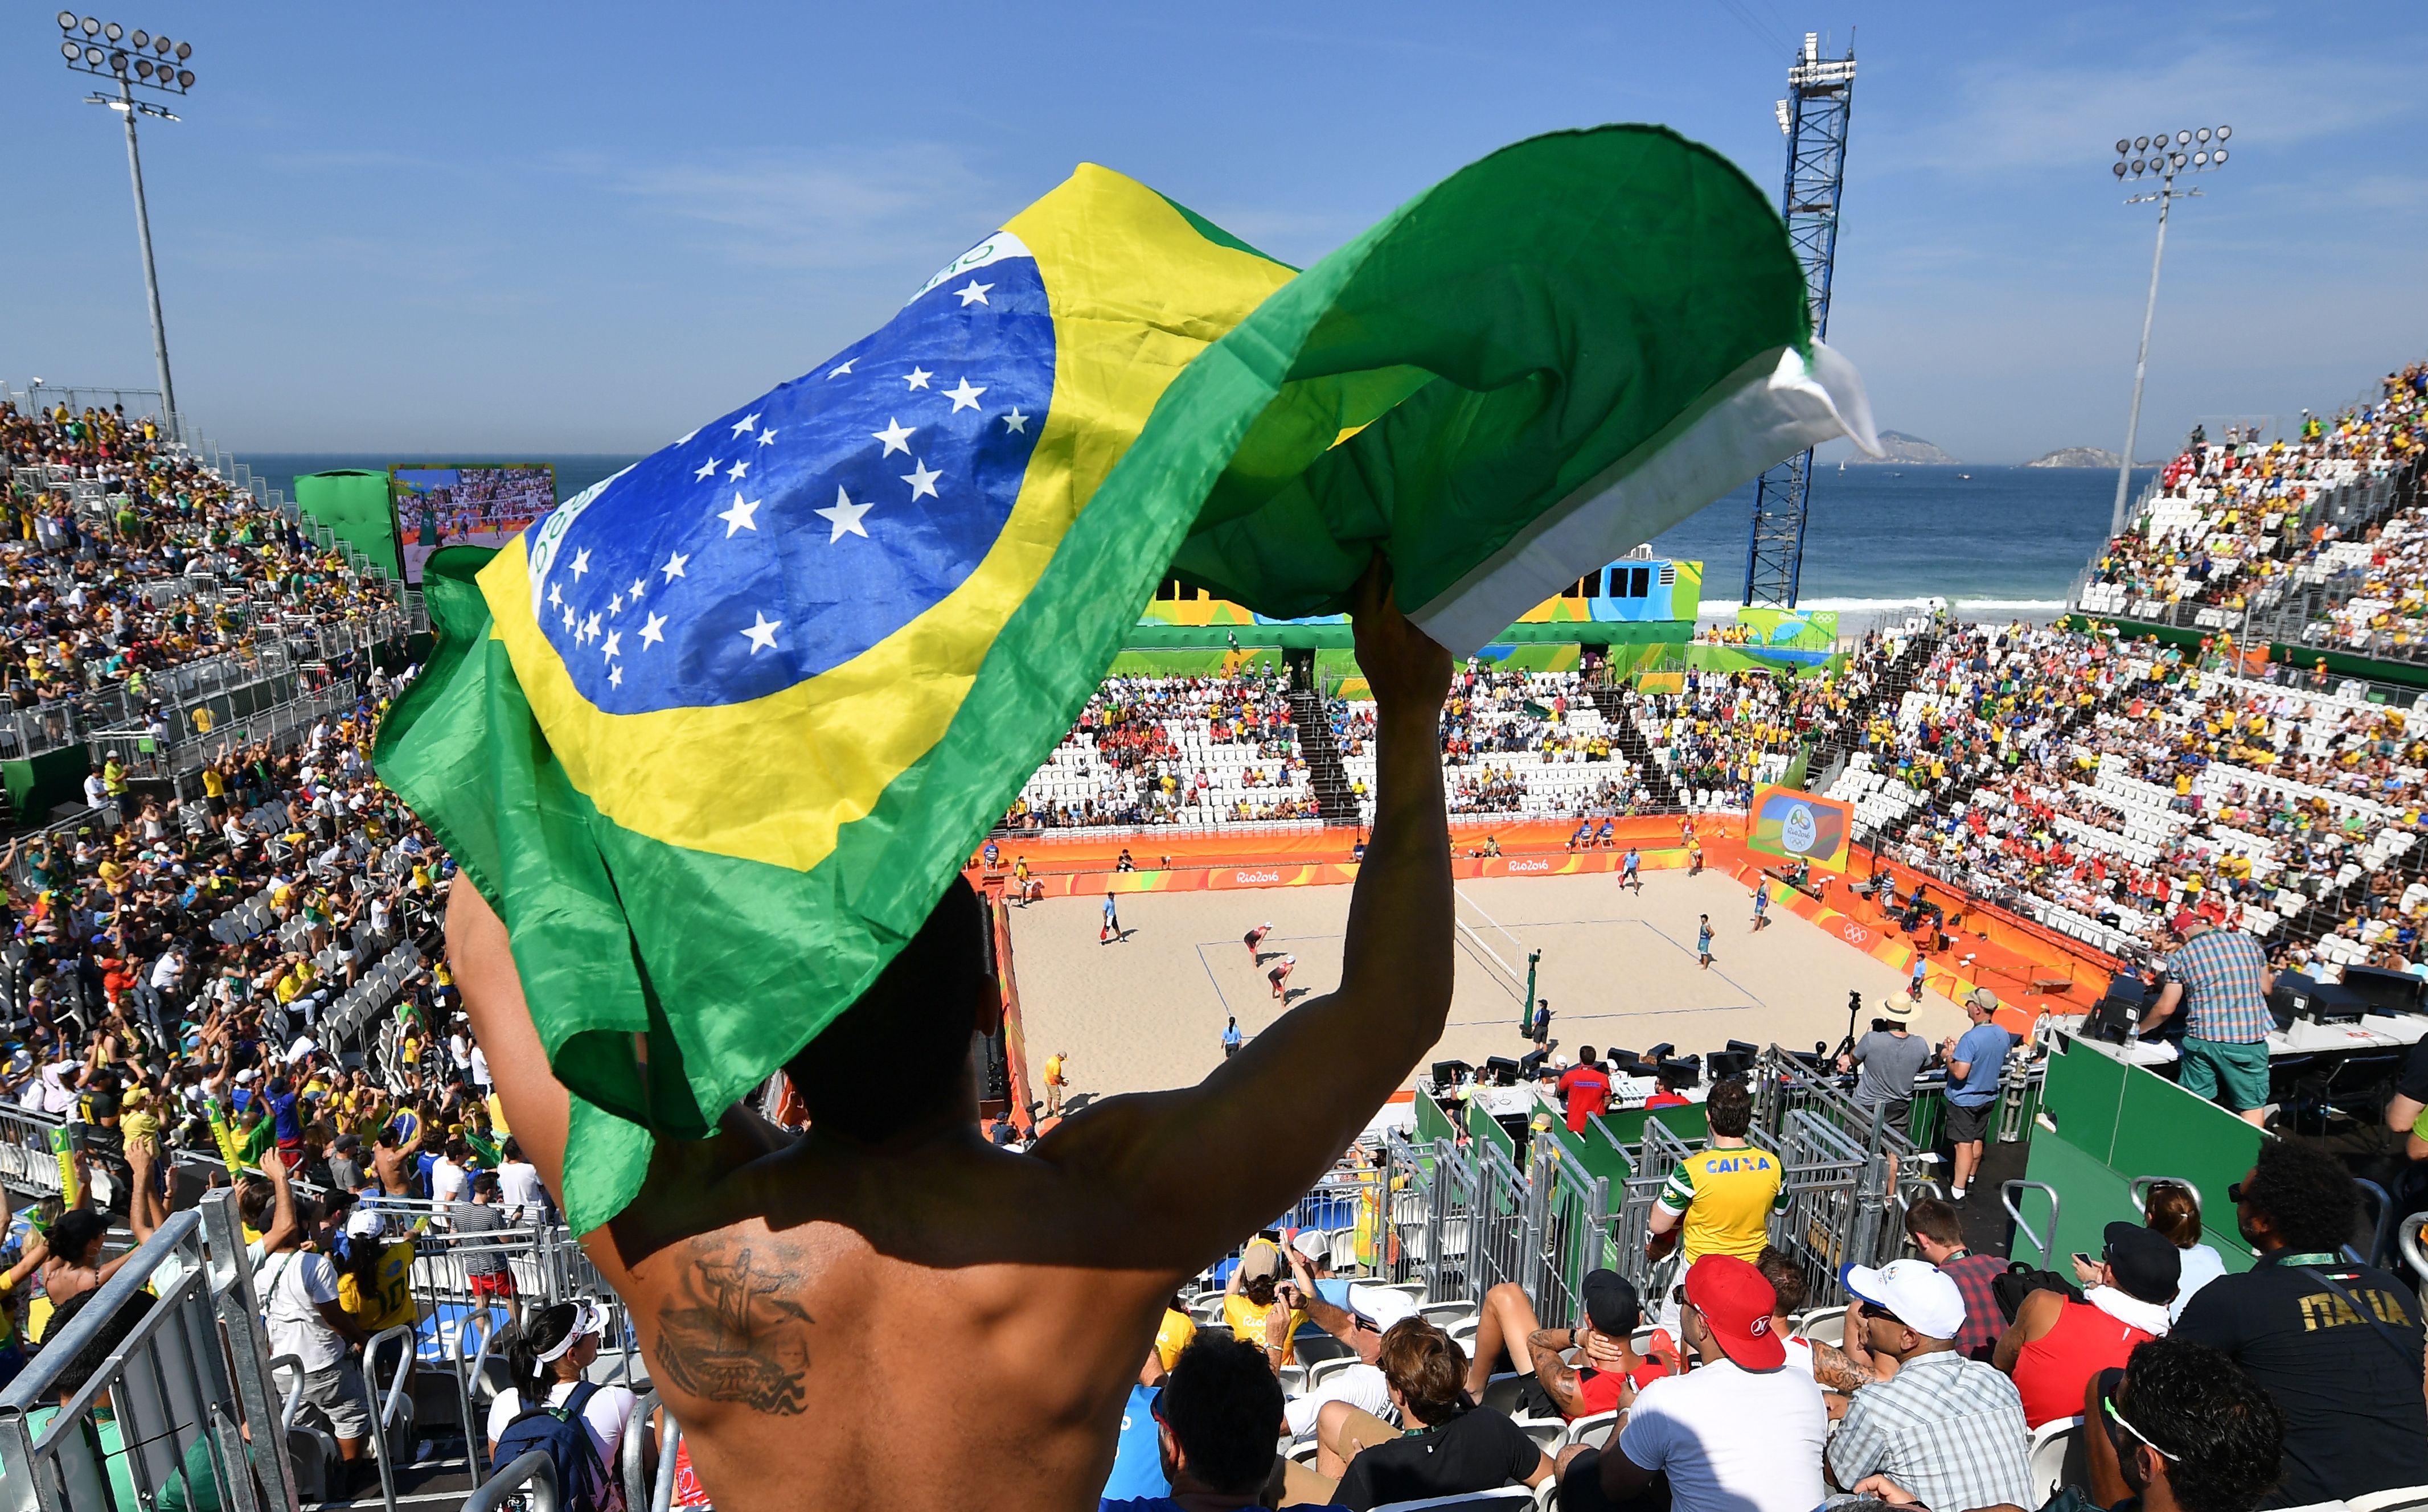 The women's beach volleyball qualifying match between Spain and Argentina at the Beach Volley Arena in Rio de Janeiro on Aug. 6, 2016. (Leon Neal&mdash;AFP/Getty Images)